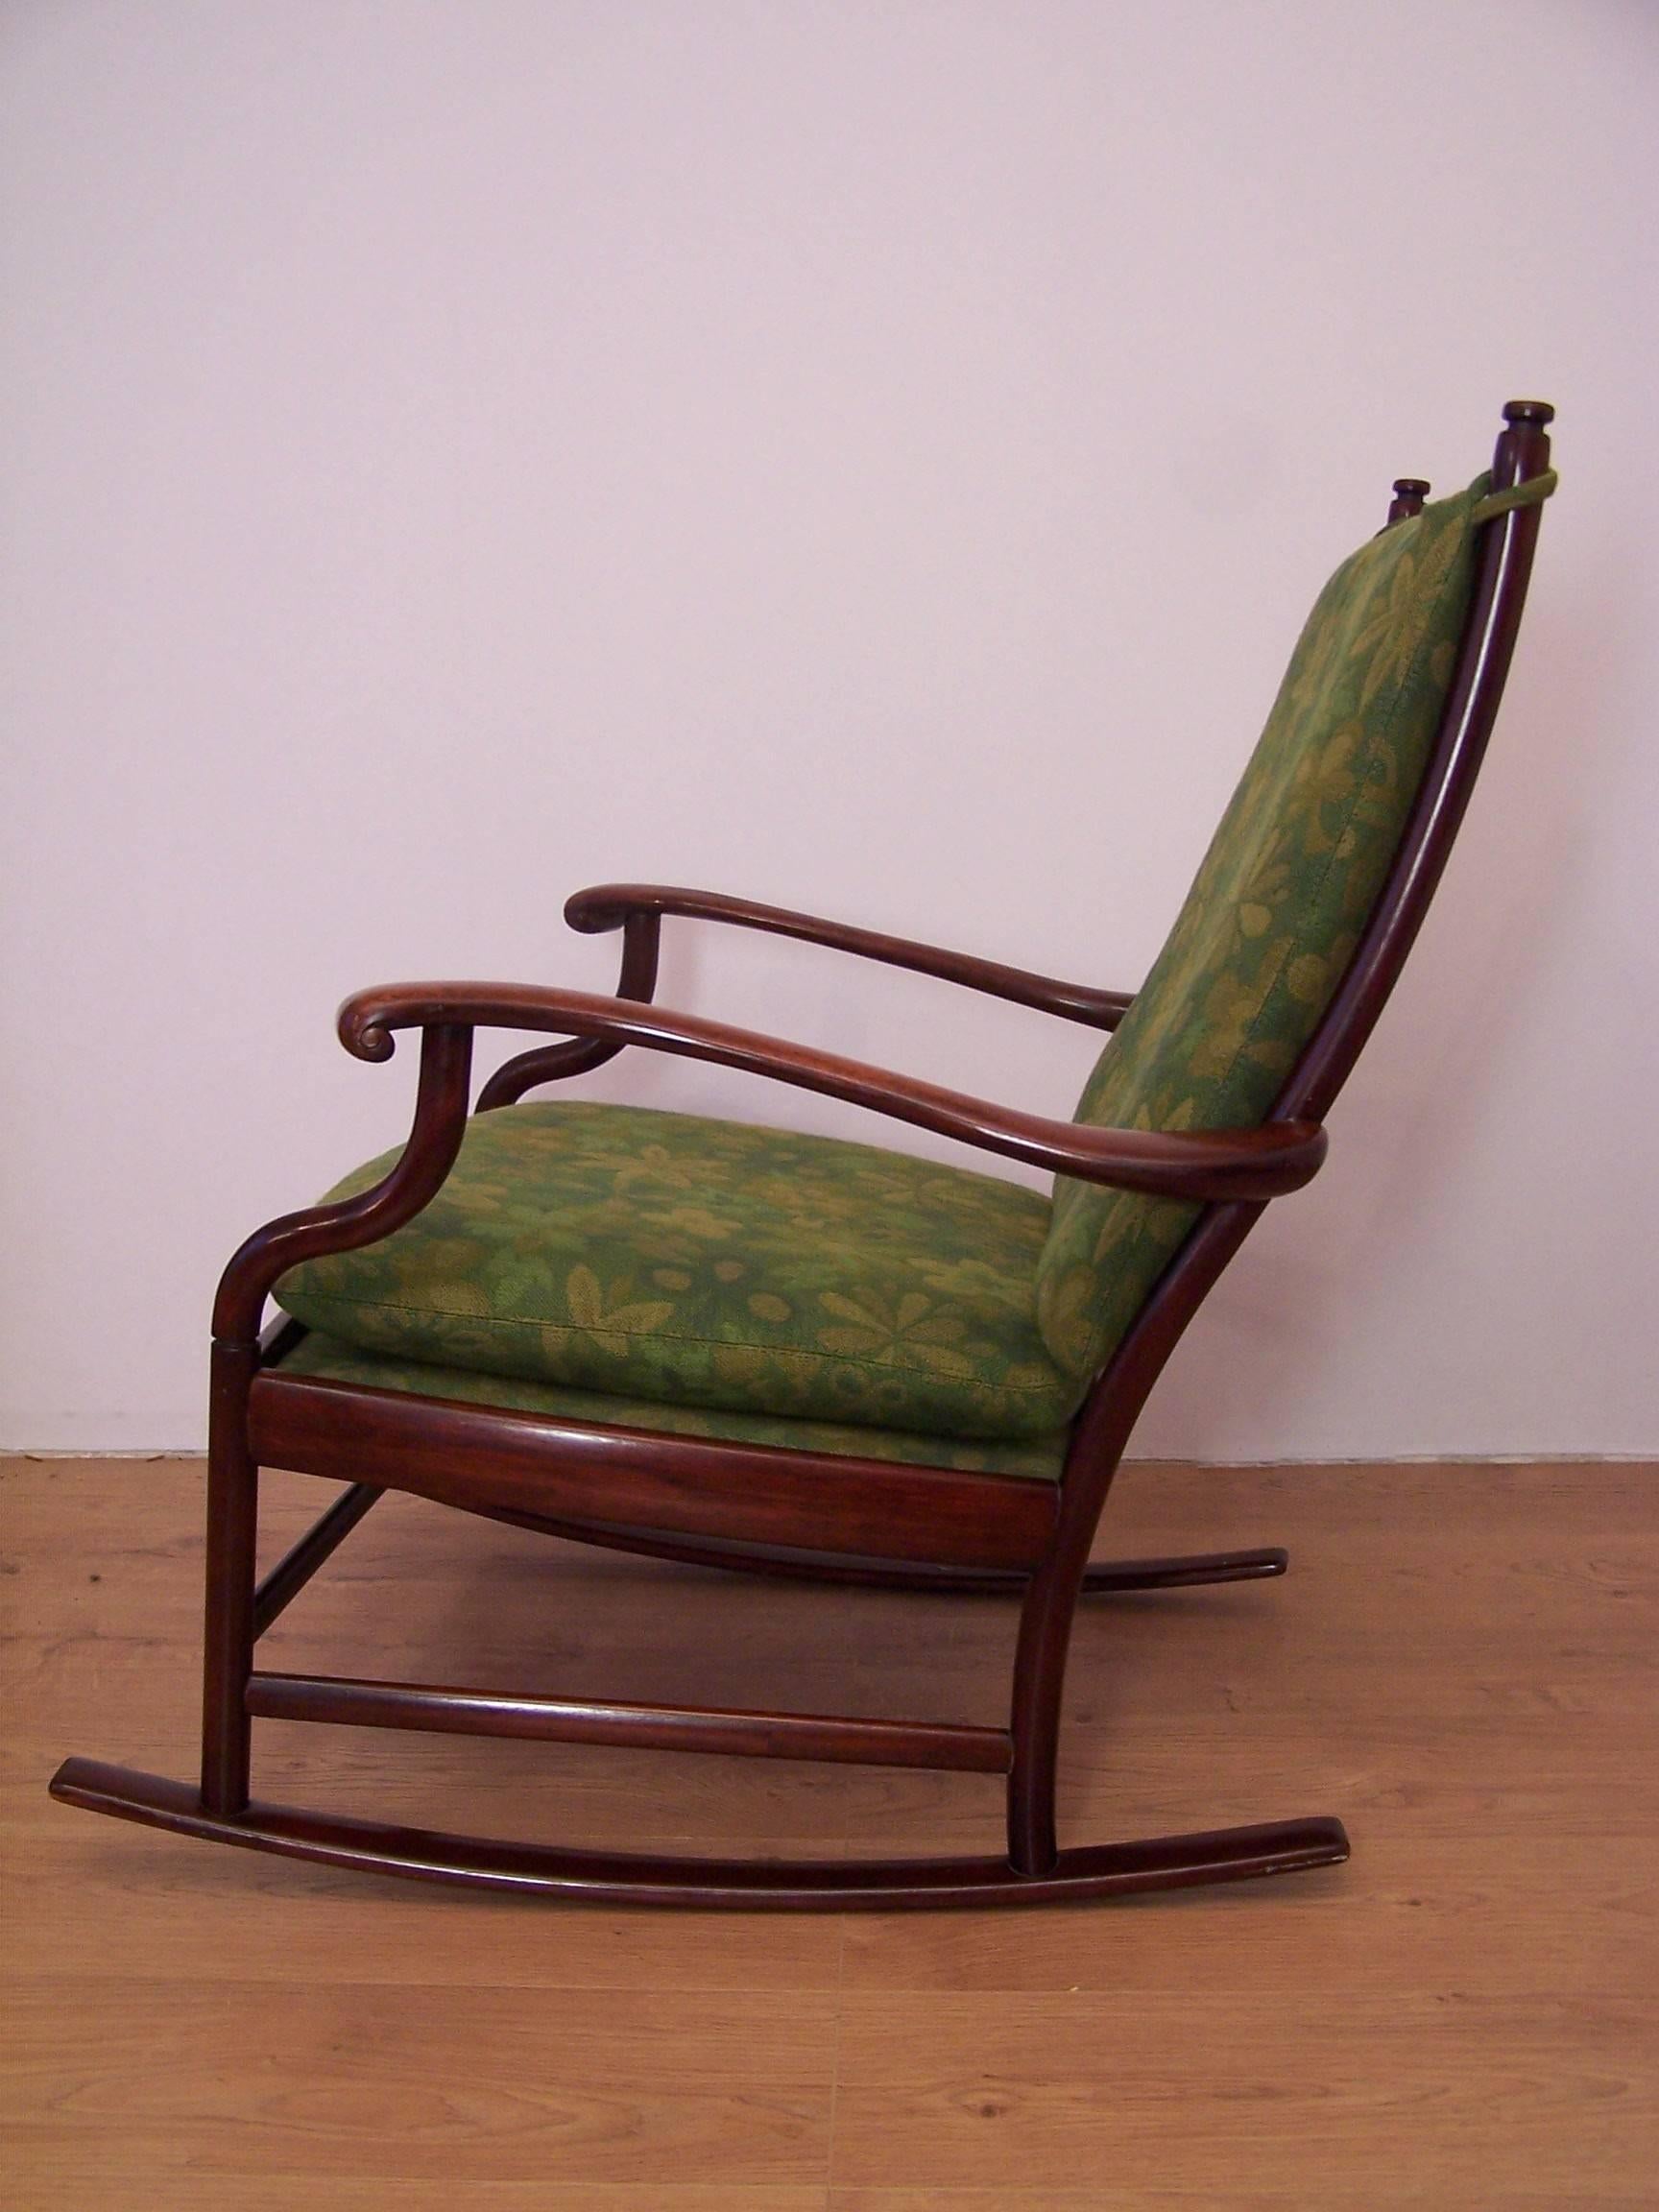 This rocking chair is made from solid rosewood and features two removable cushions which are covered with a green wool fabric that features a floral pattern.